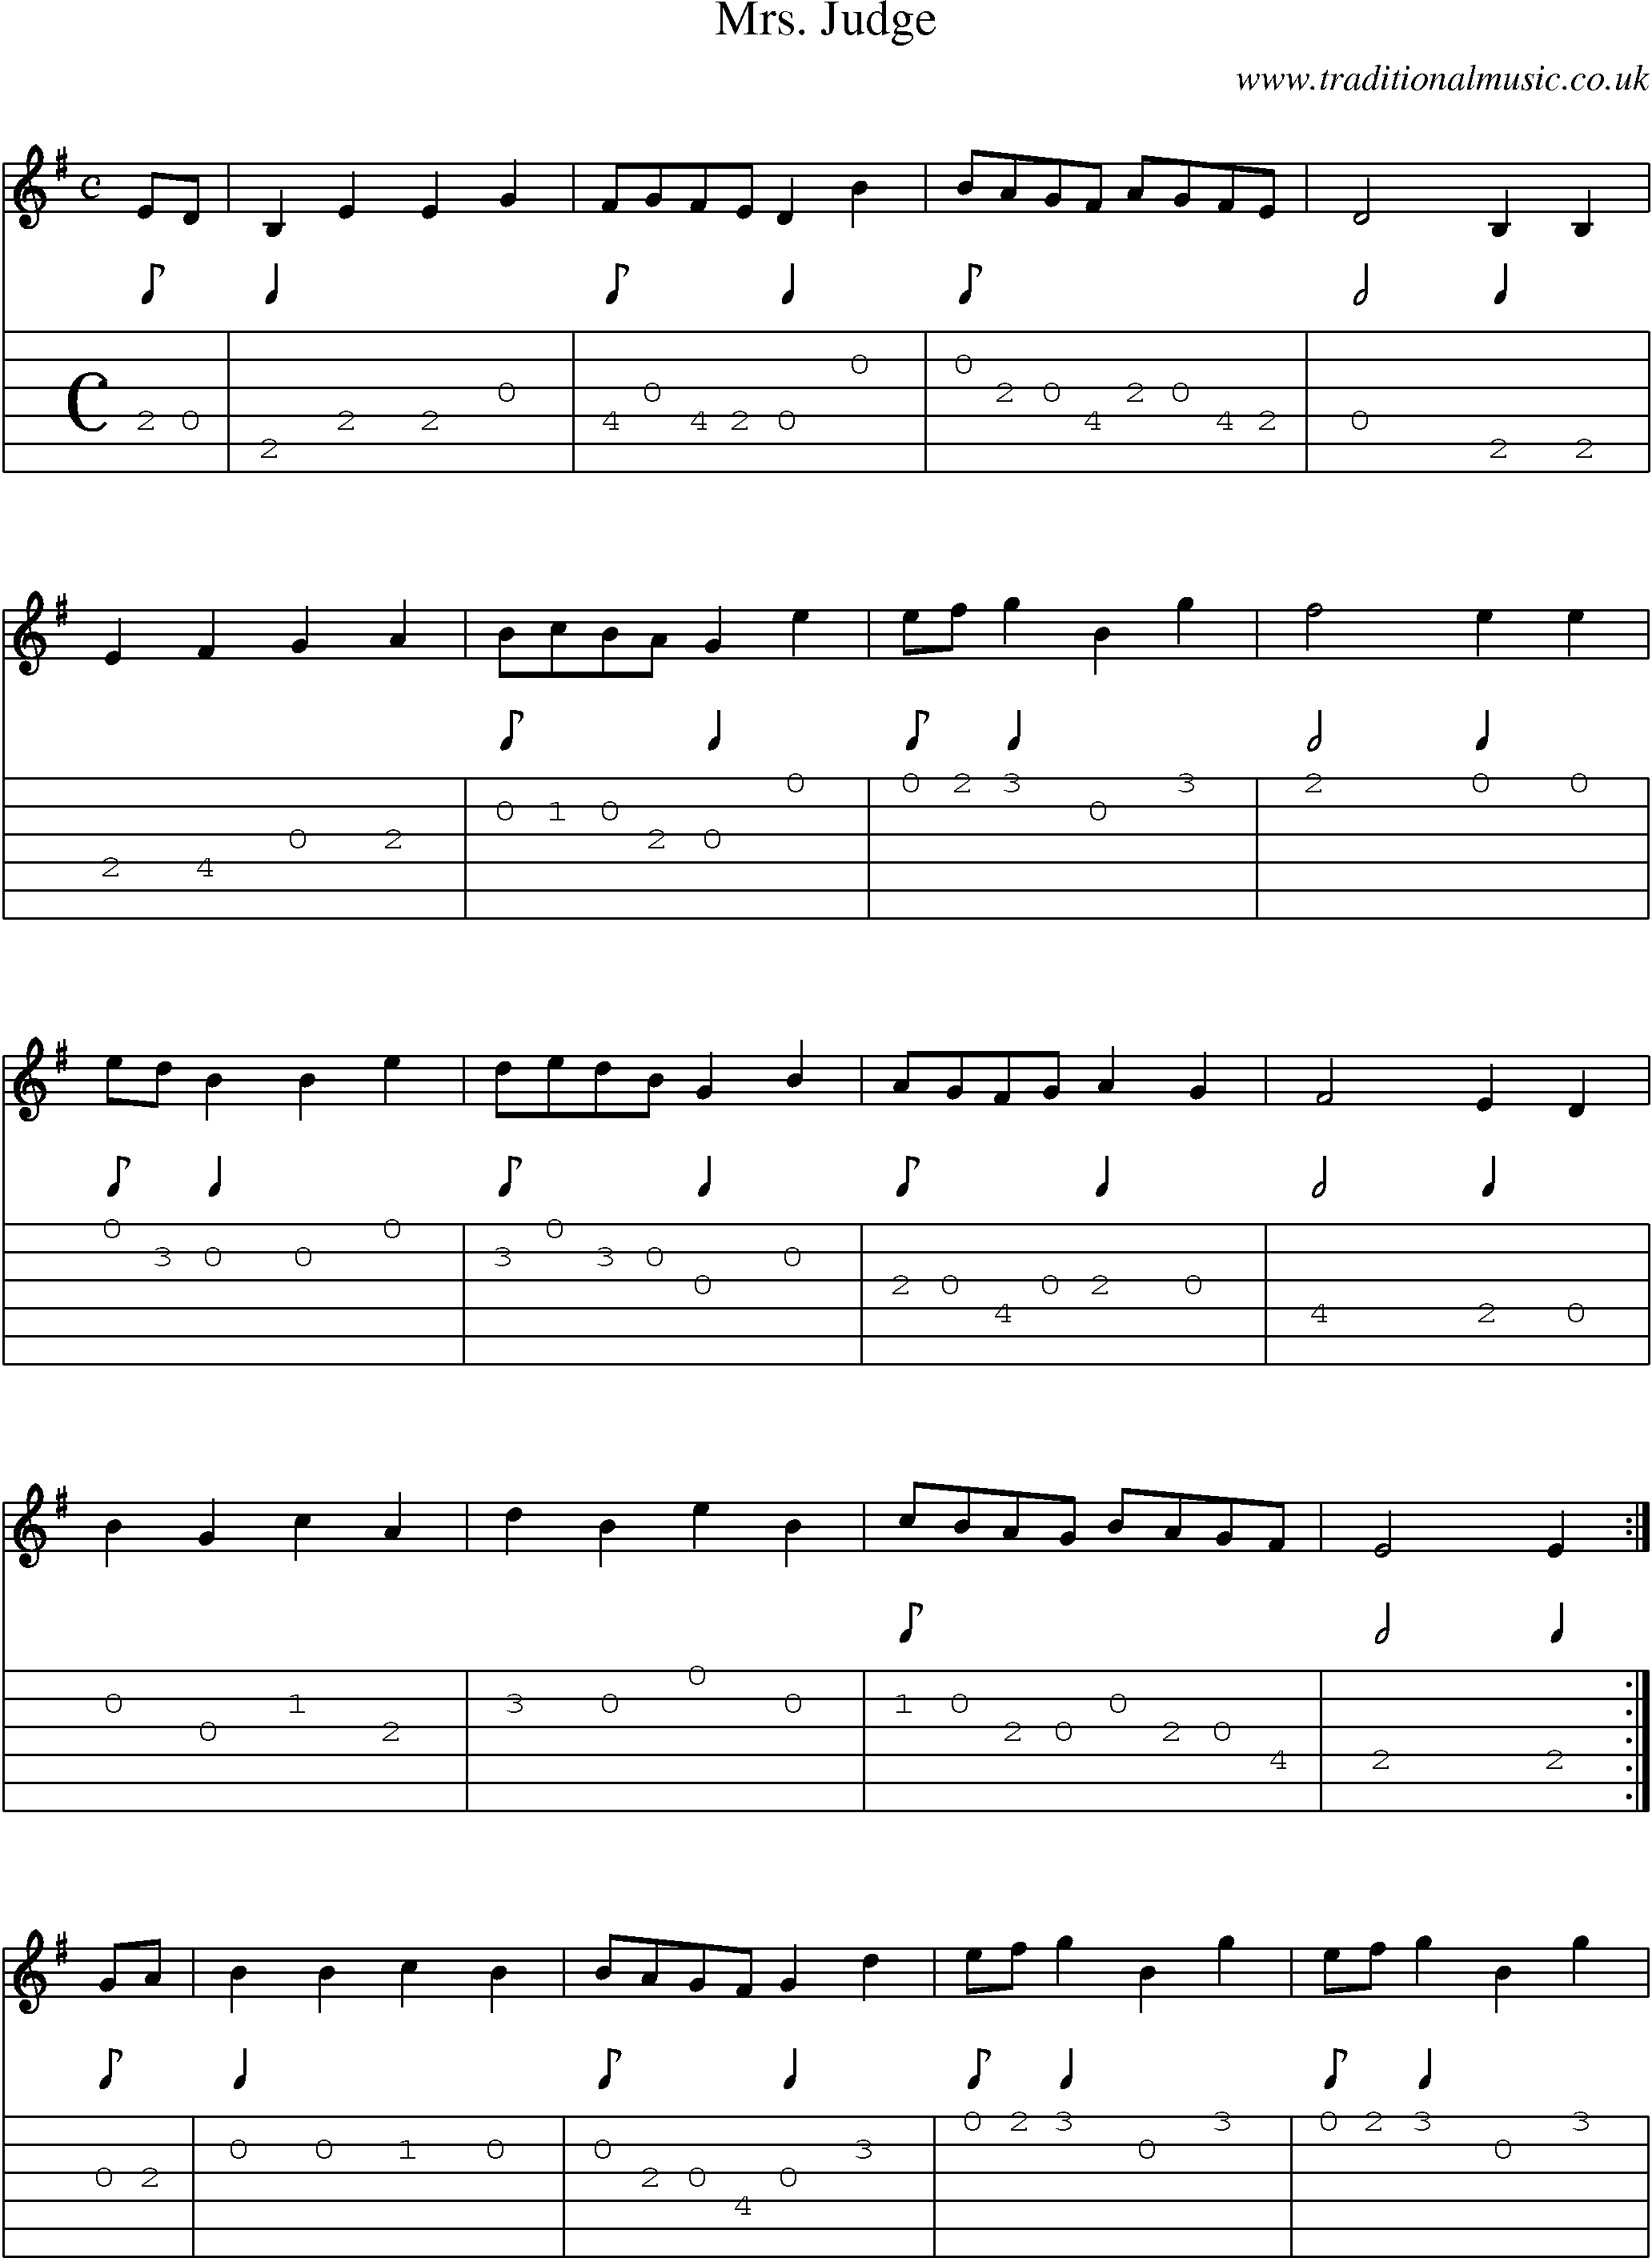 Music Score and Guitar Tabs for Mrs Judge